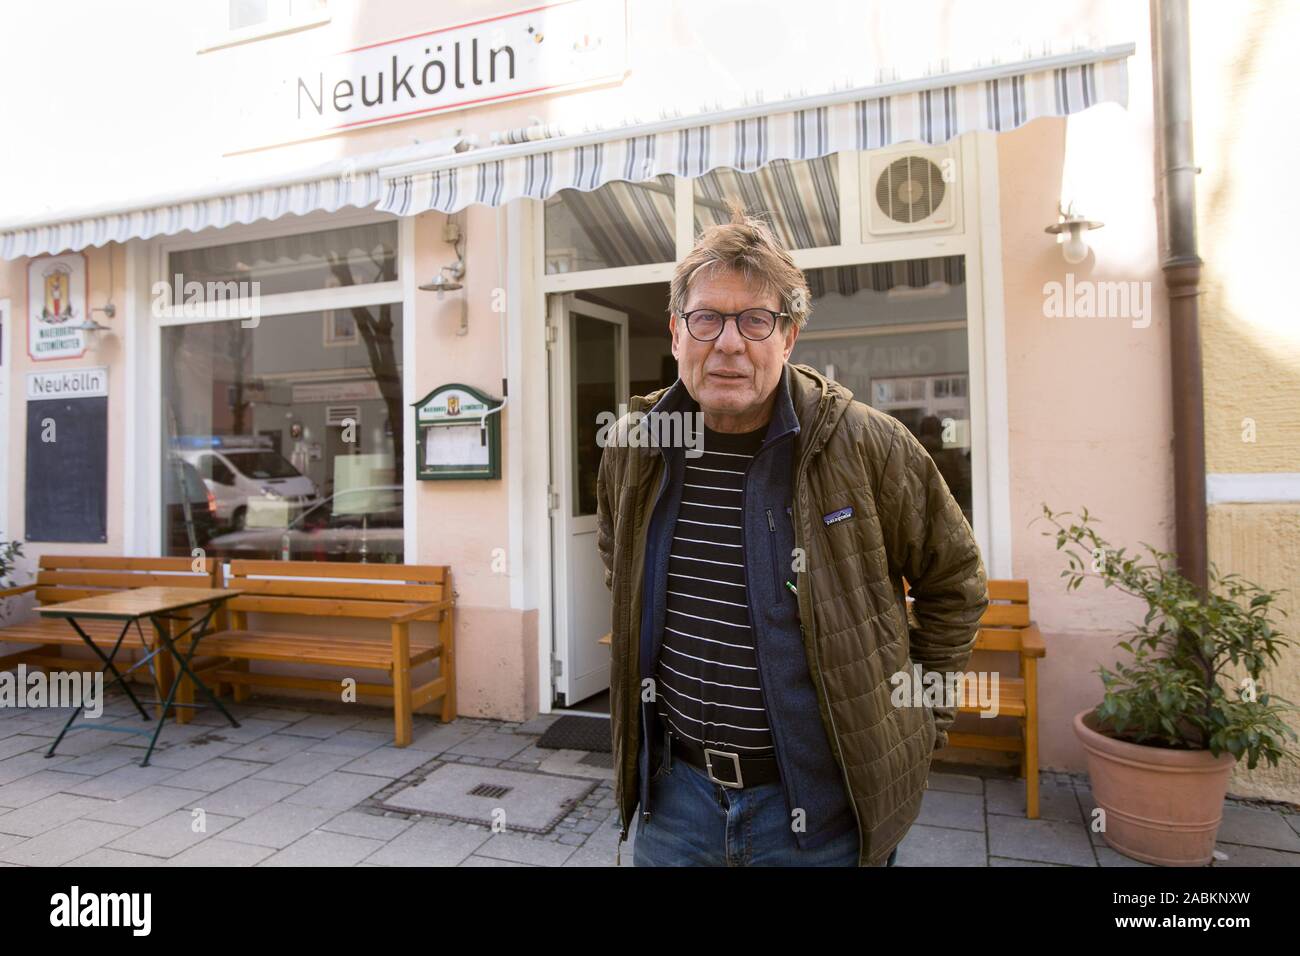 The filmmaker and pub owner Wolfgang Ettlich in front of his restaurant 'Neukölln' in Clemensstraße 82 in Schwabing, which is held in the style of a Berlin district pub. [automated translation] Stock Photo